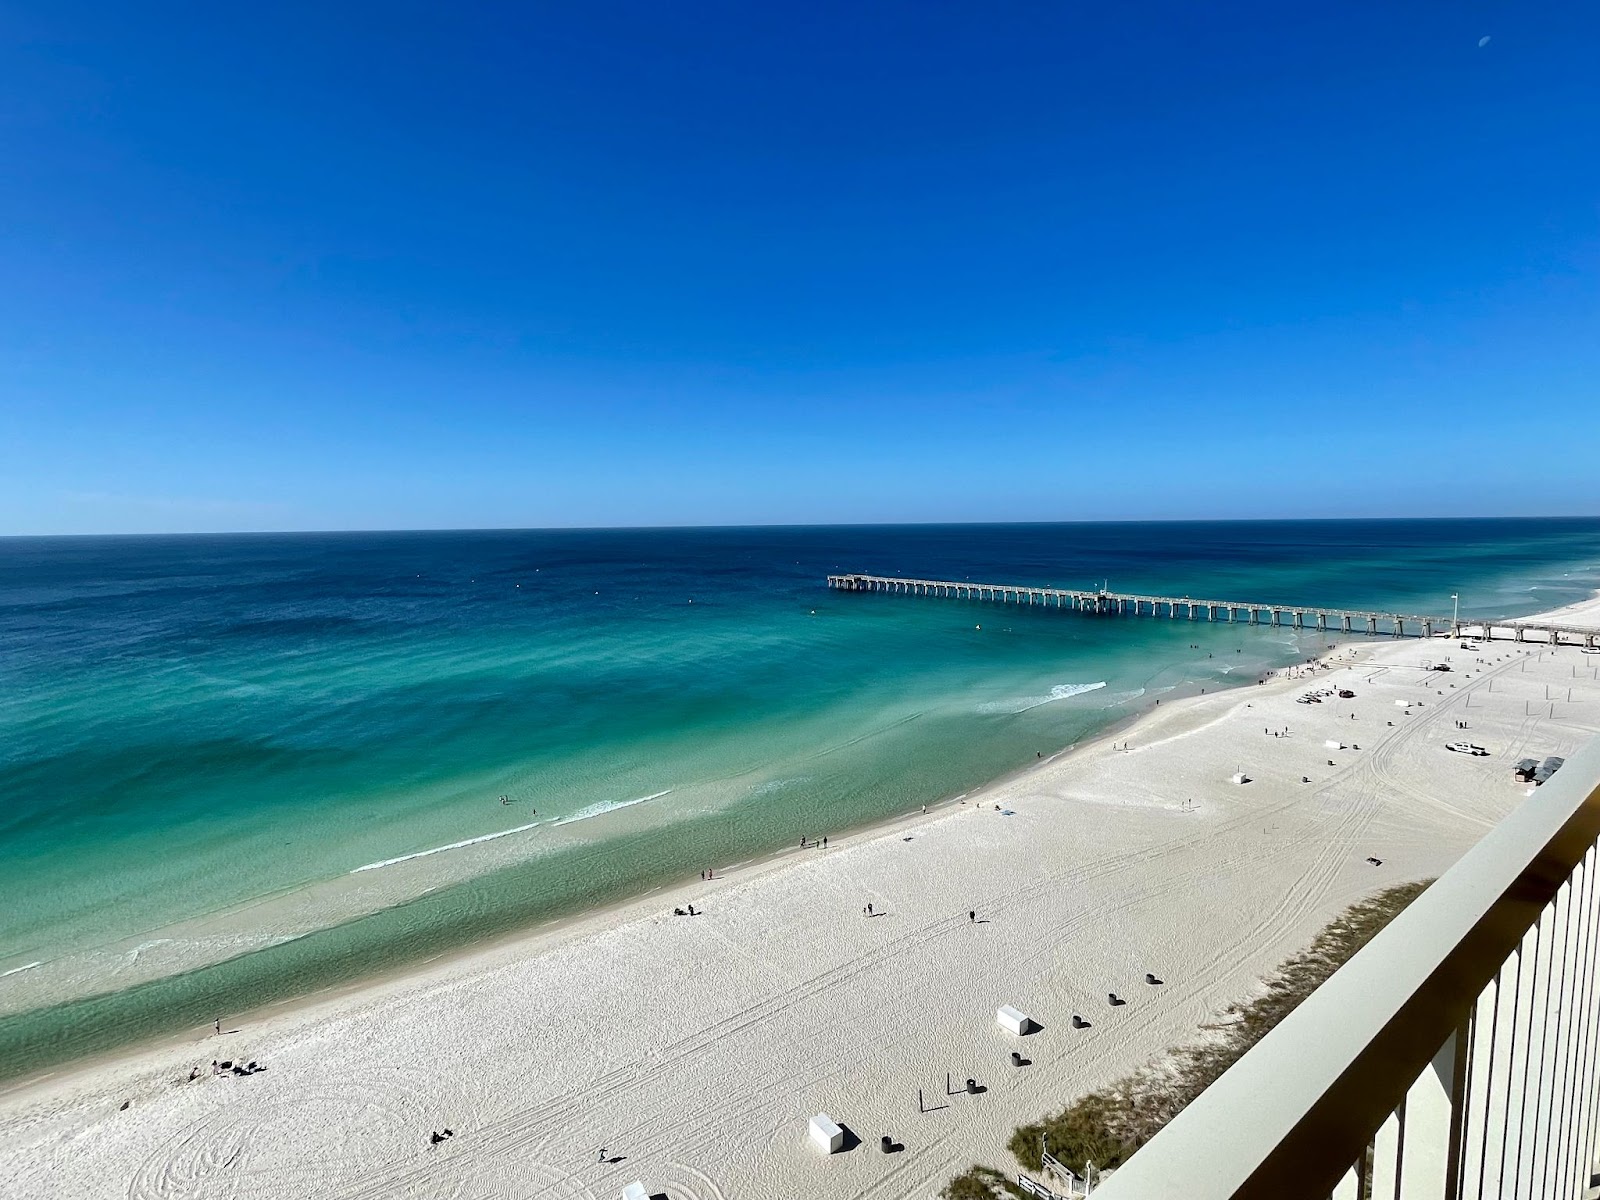 View from my condo of the Ironman Florida 2023 swim course being set up.